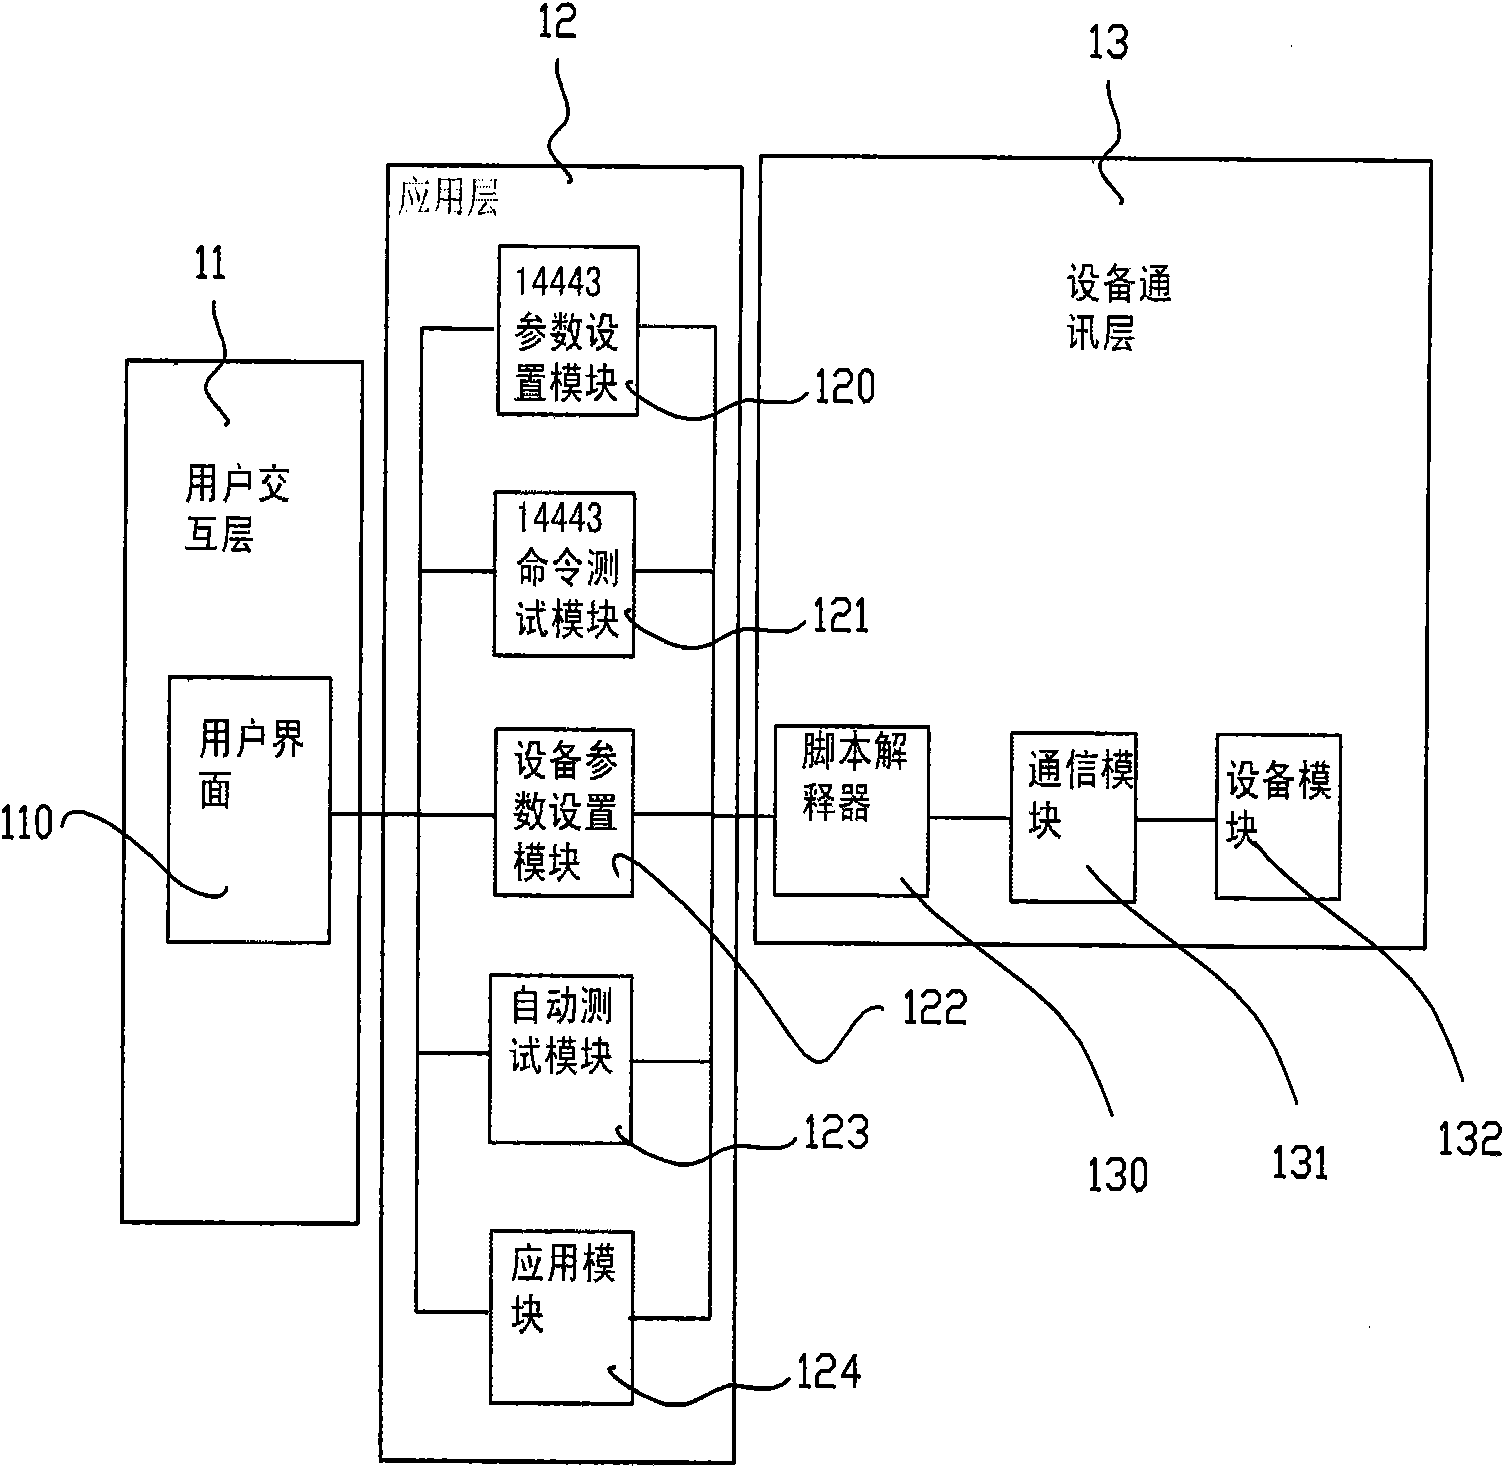 Non-contact IC card radio frequency protocol and application testing method